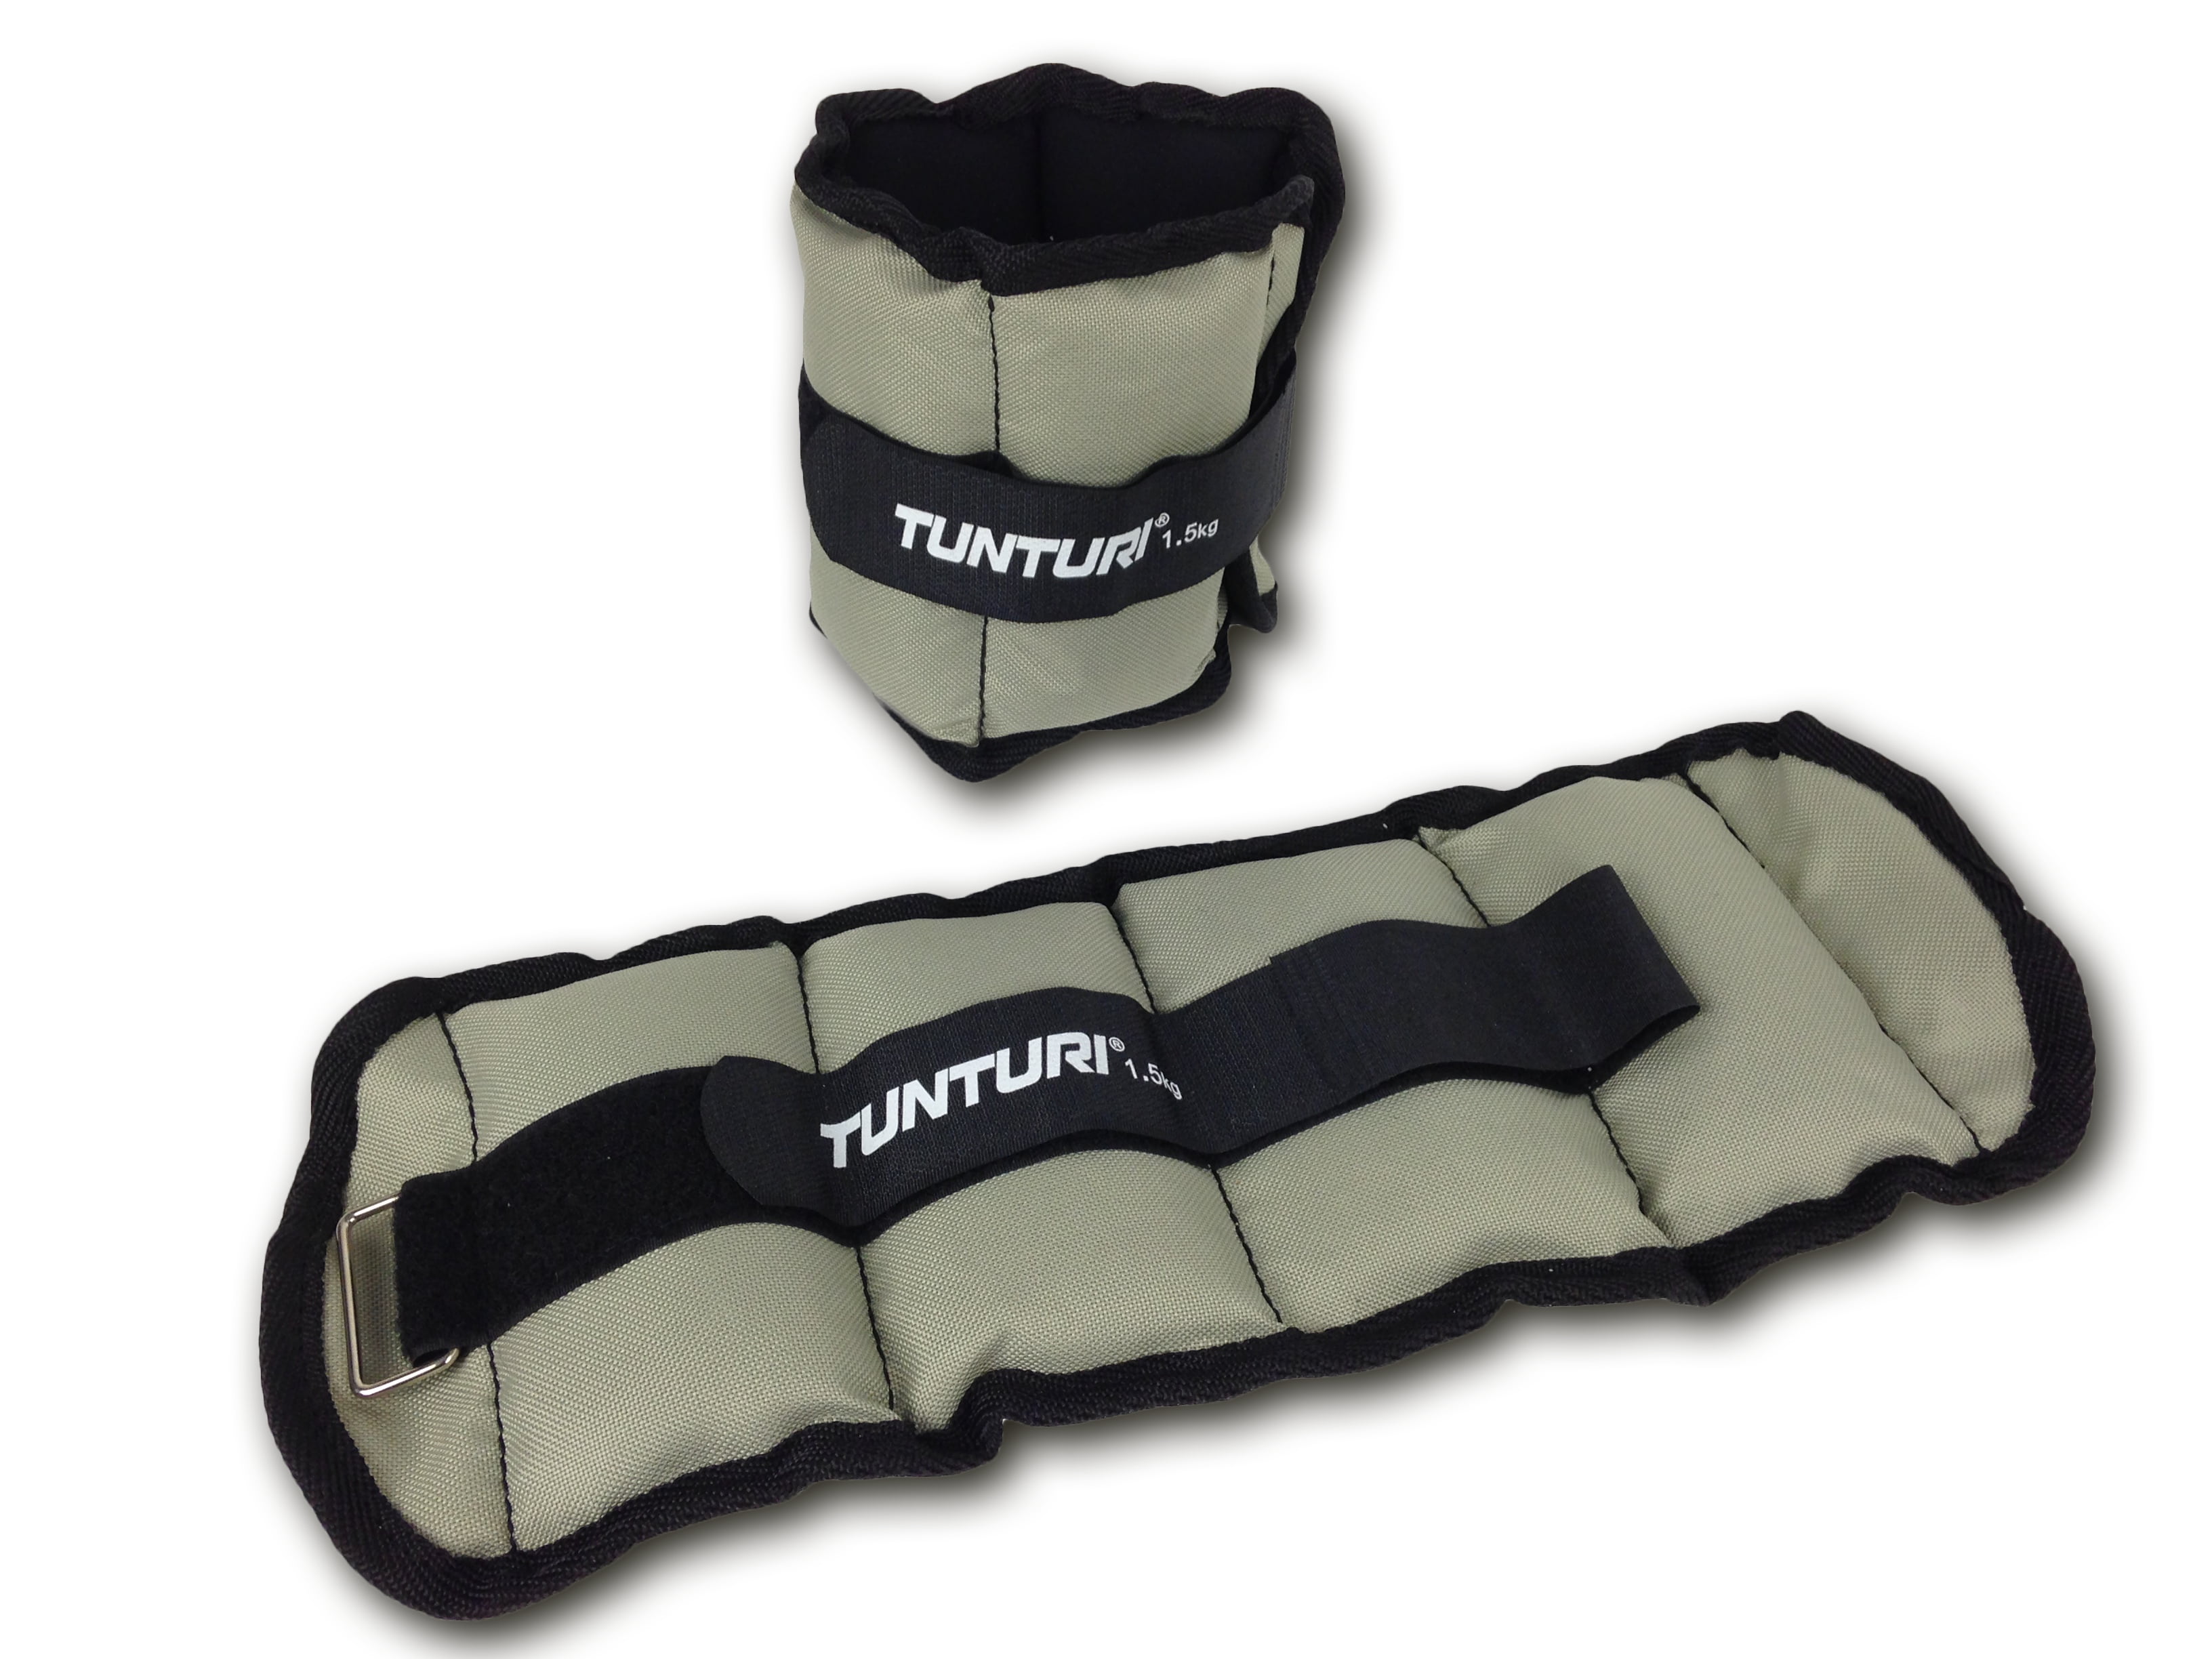 2 Pair 3 and 4 Weights Tunturi Arm/Leg Weights in 1